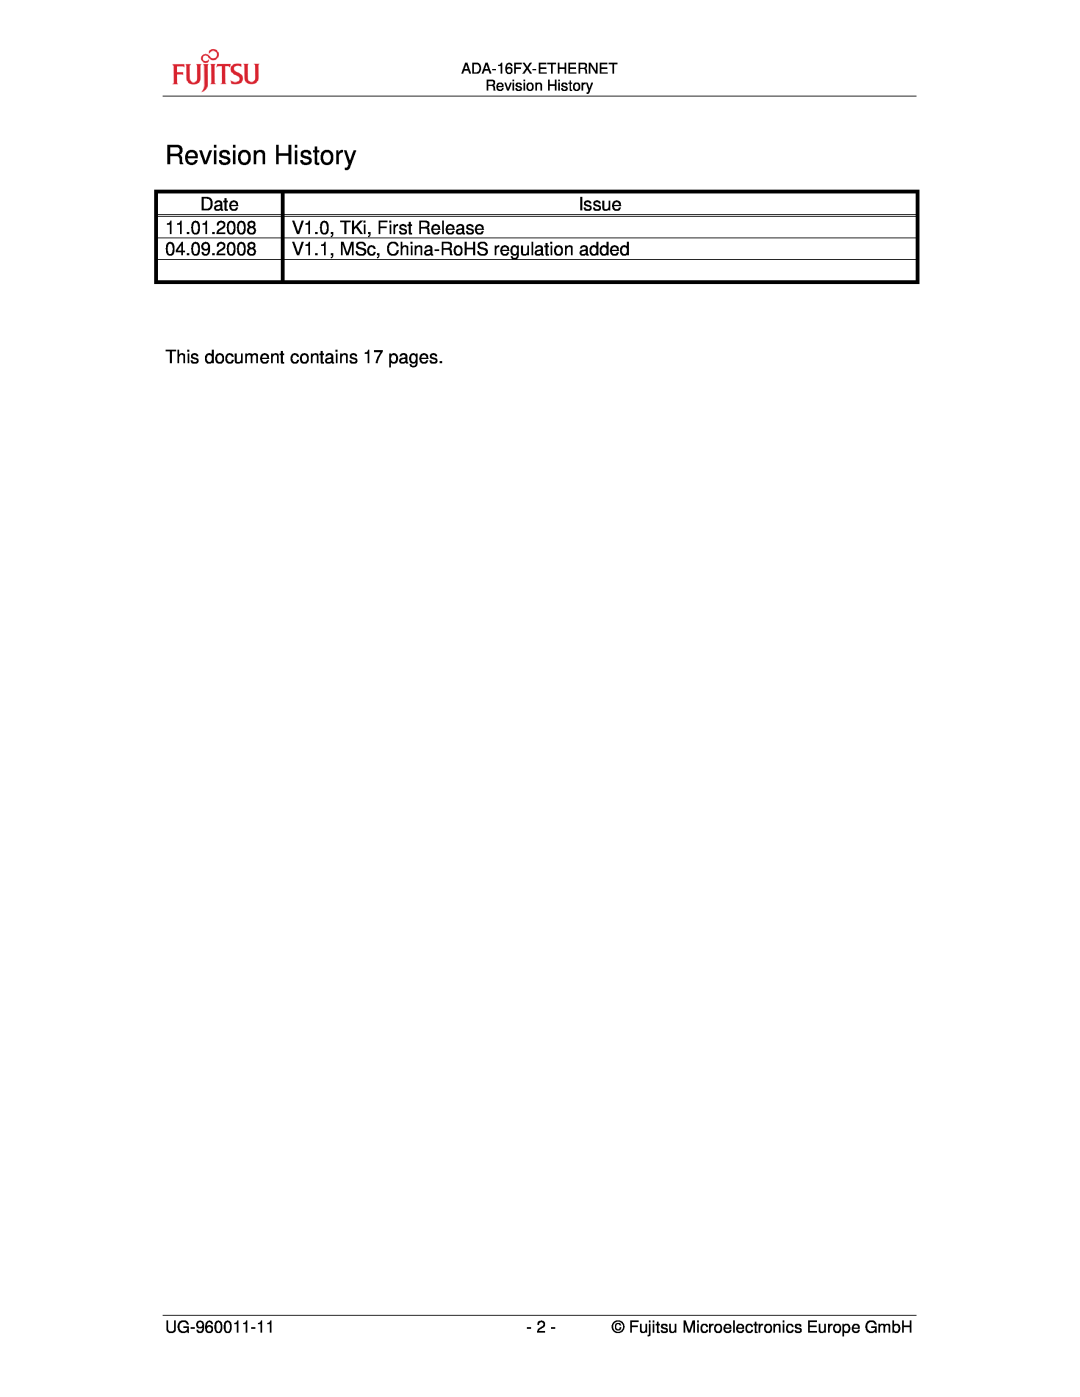 Fujitsu manual Revision History, Date, Issue, 11.01.2008, V1.0, TKi, First Release, 04.09.2008, ADA-16FX-ETHERNET 